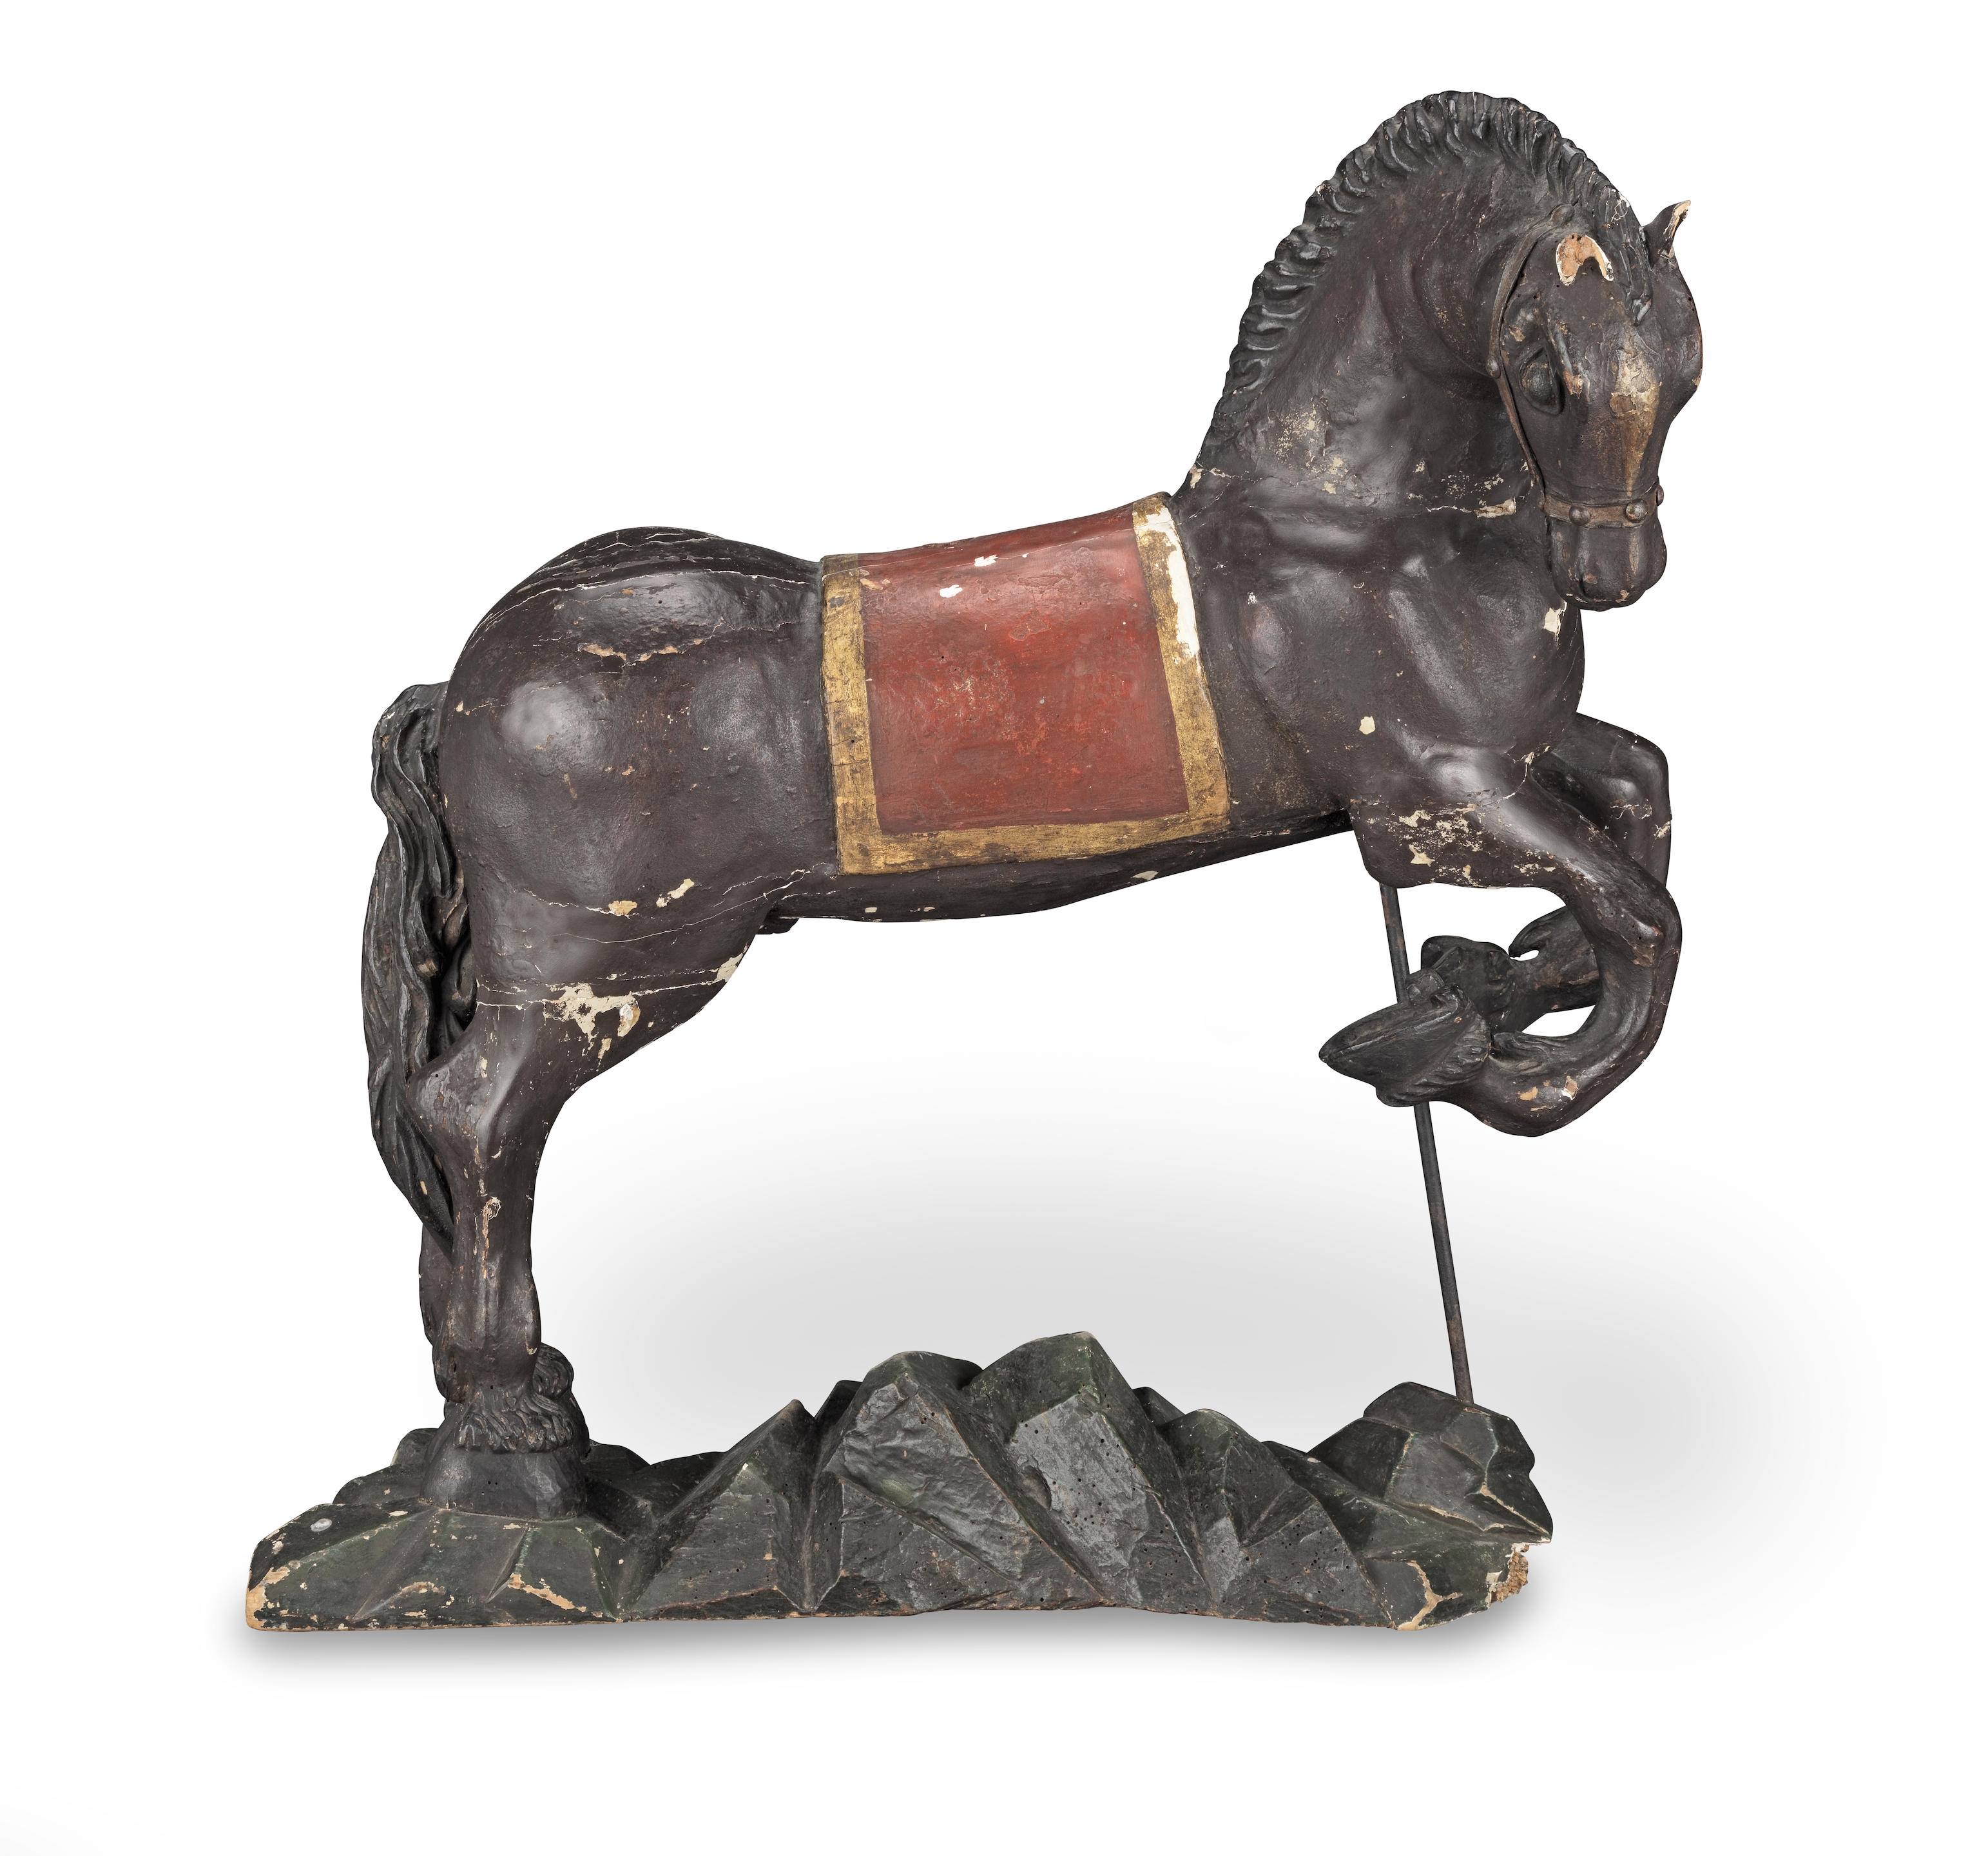 A carved and polychrome model of St George's horse - German School, 16th Century